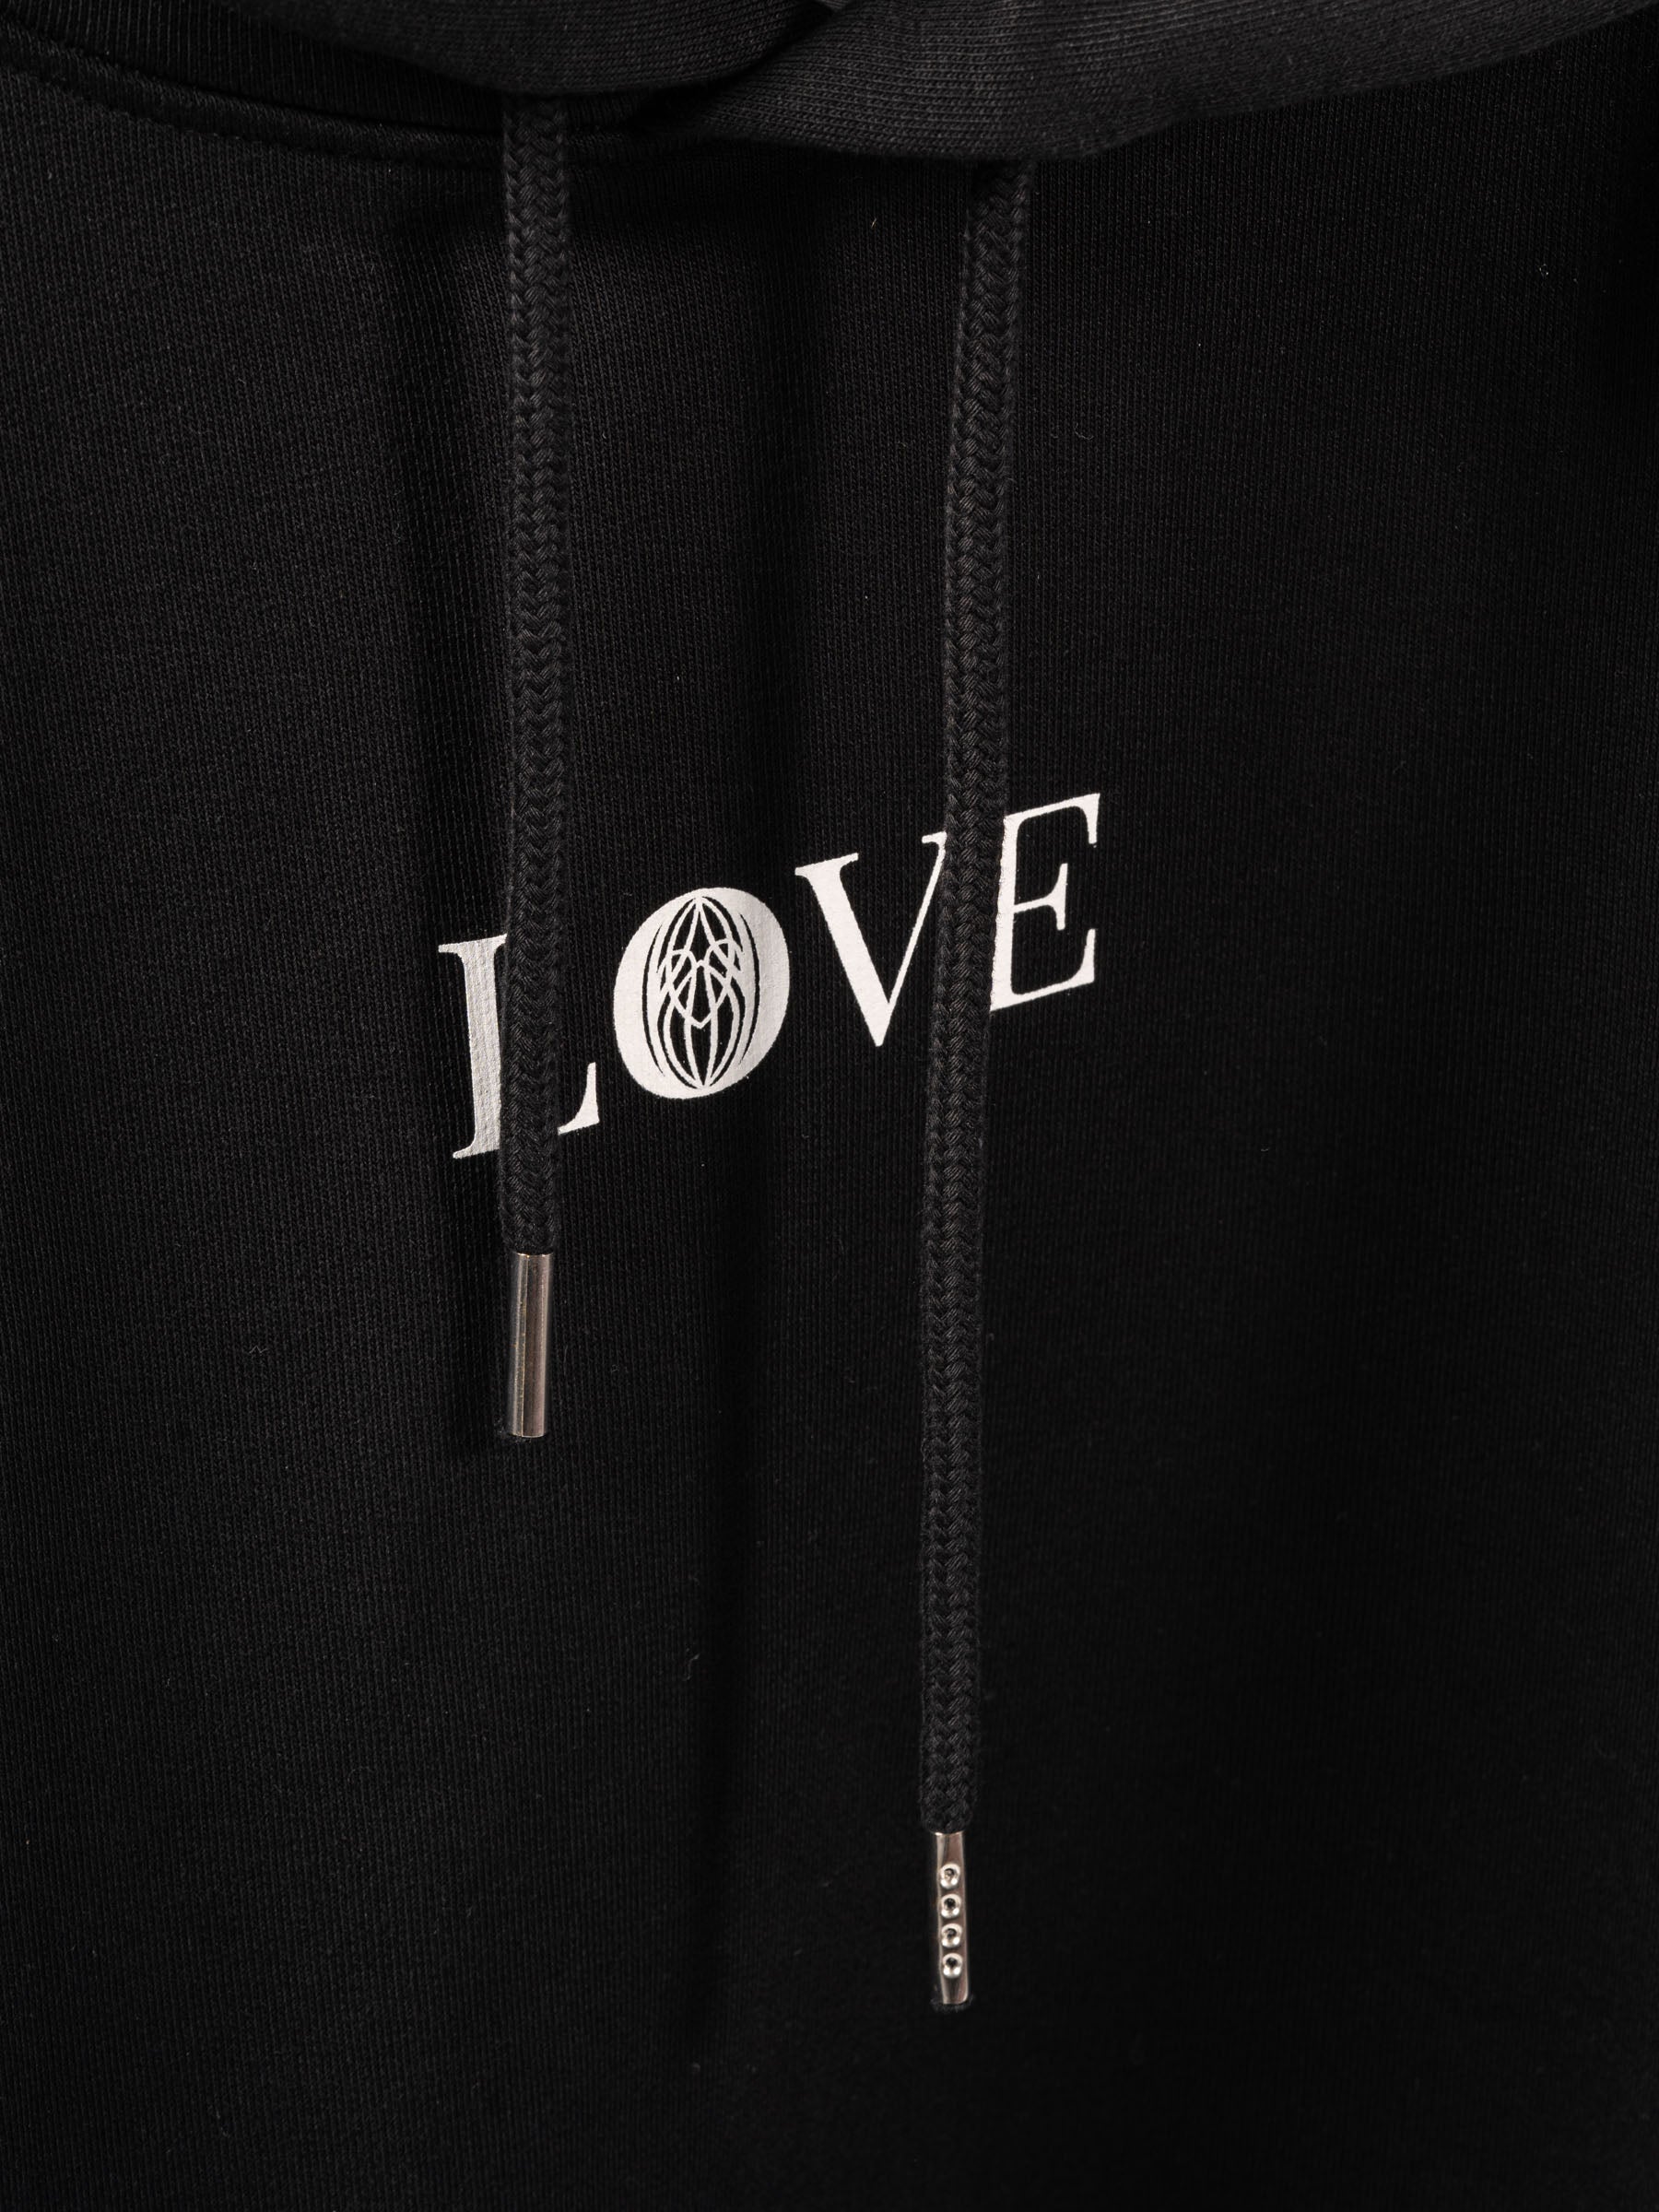 Classic Love Hooded Sweater Black